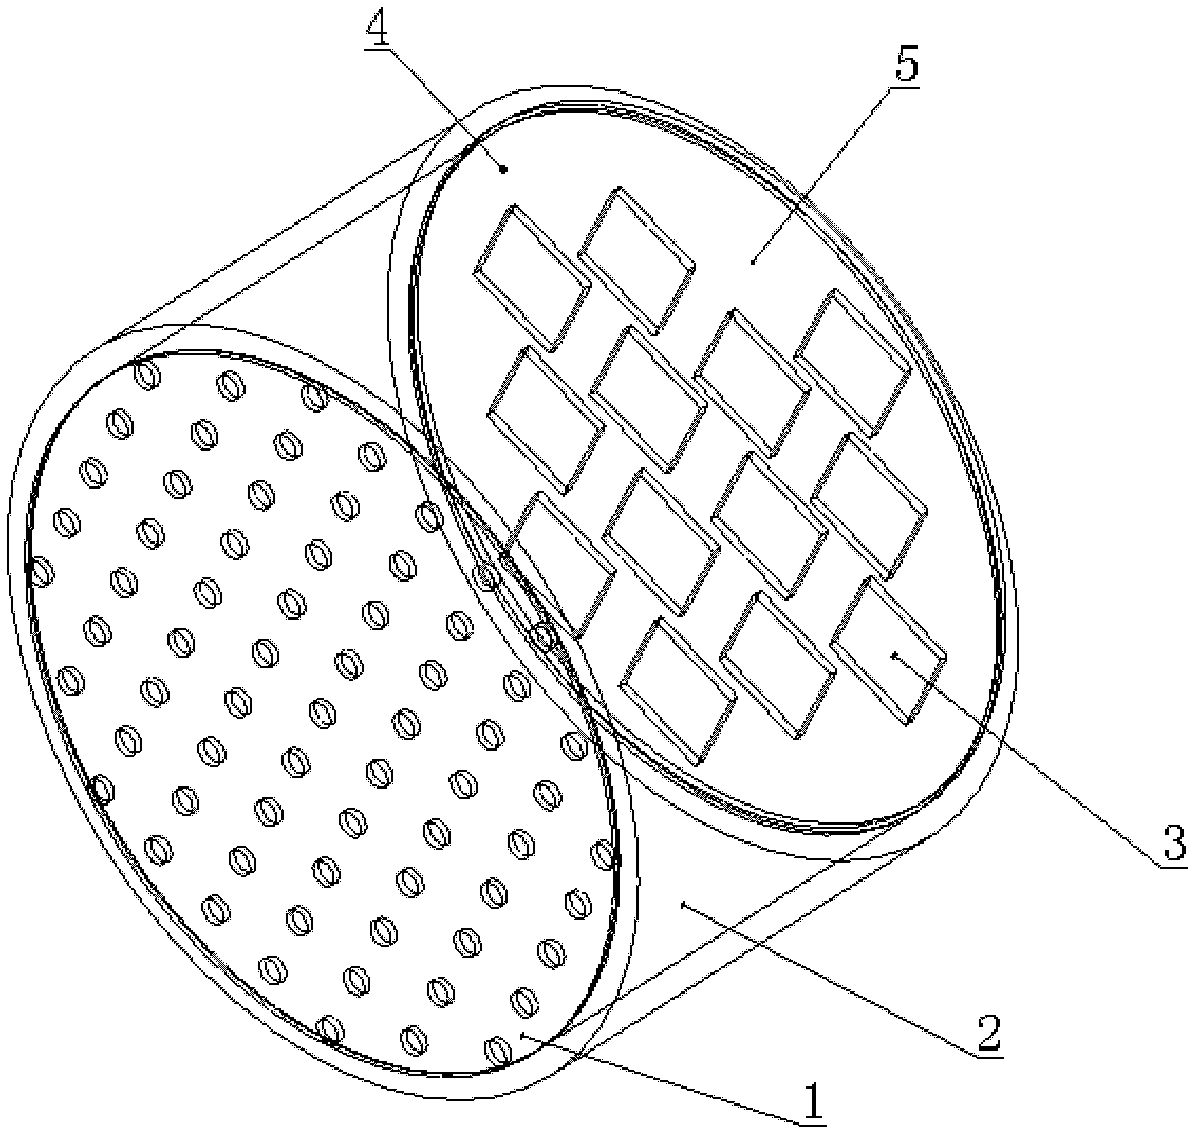 Noise power generating device based on micro-perforated panel structure